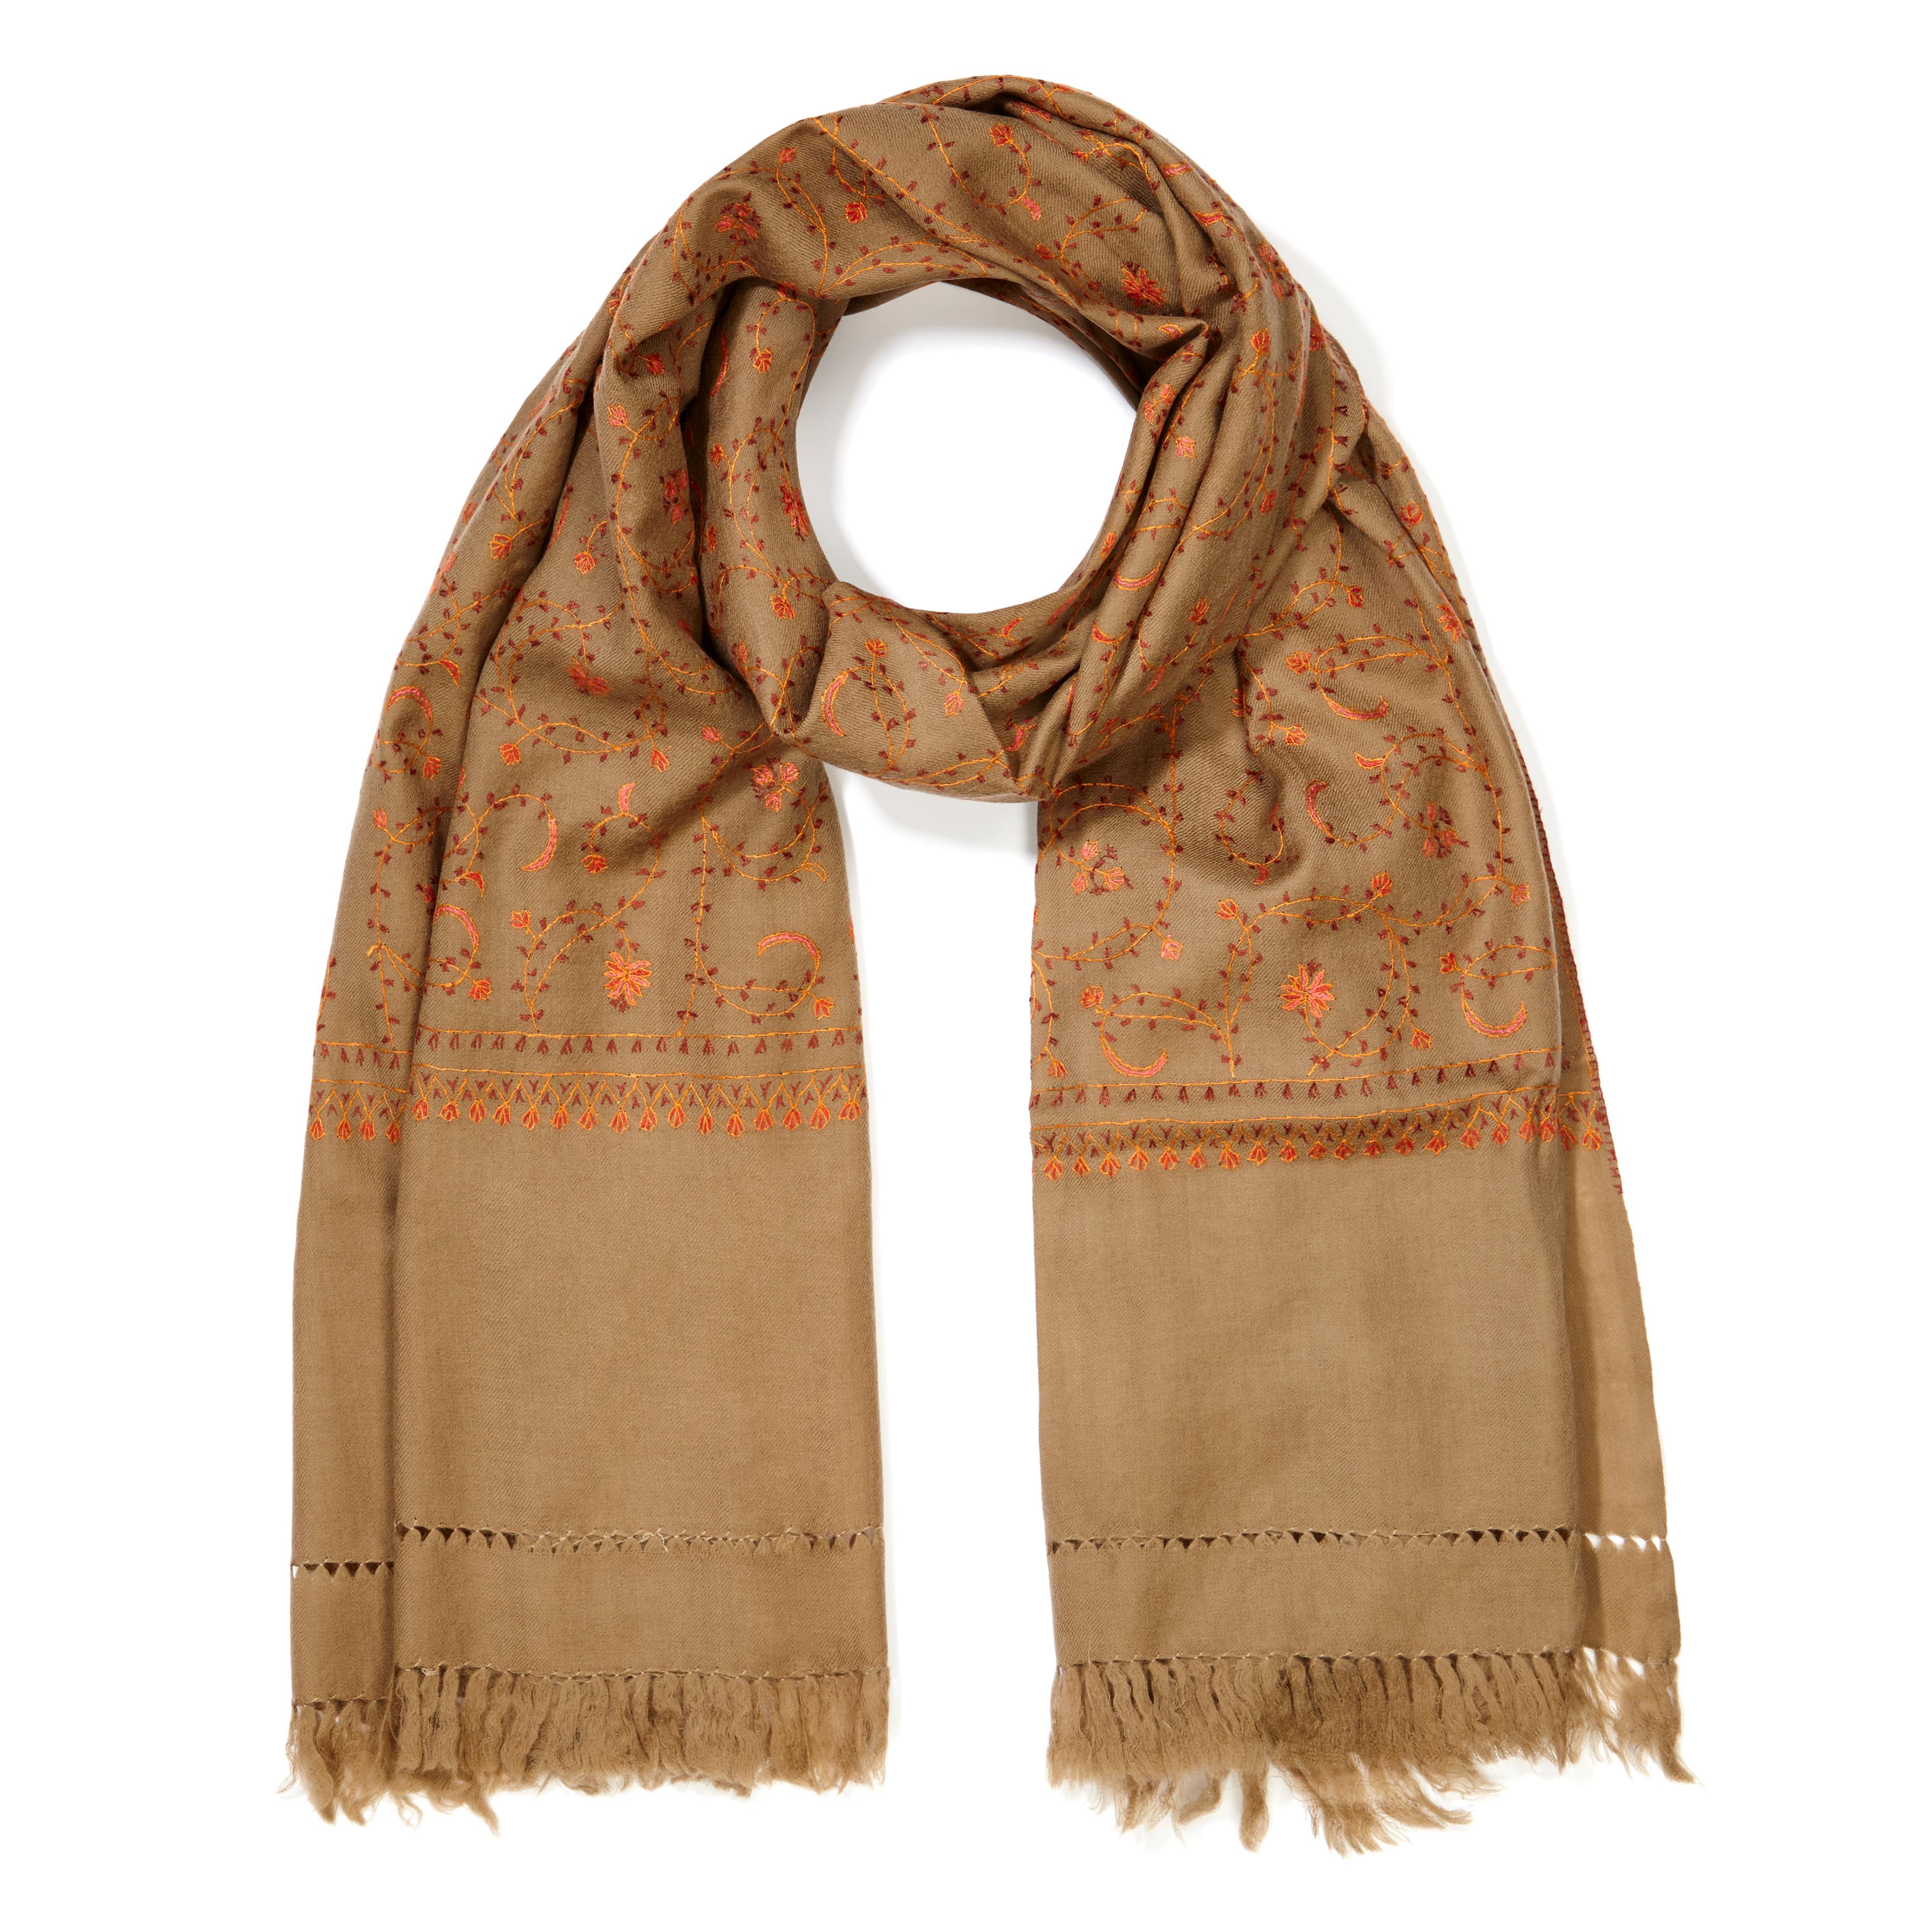 Women's or Men's Hand Embroidered Cashmere Shawl in Tan Brown Made in Kashmir - Gift